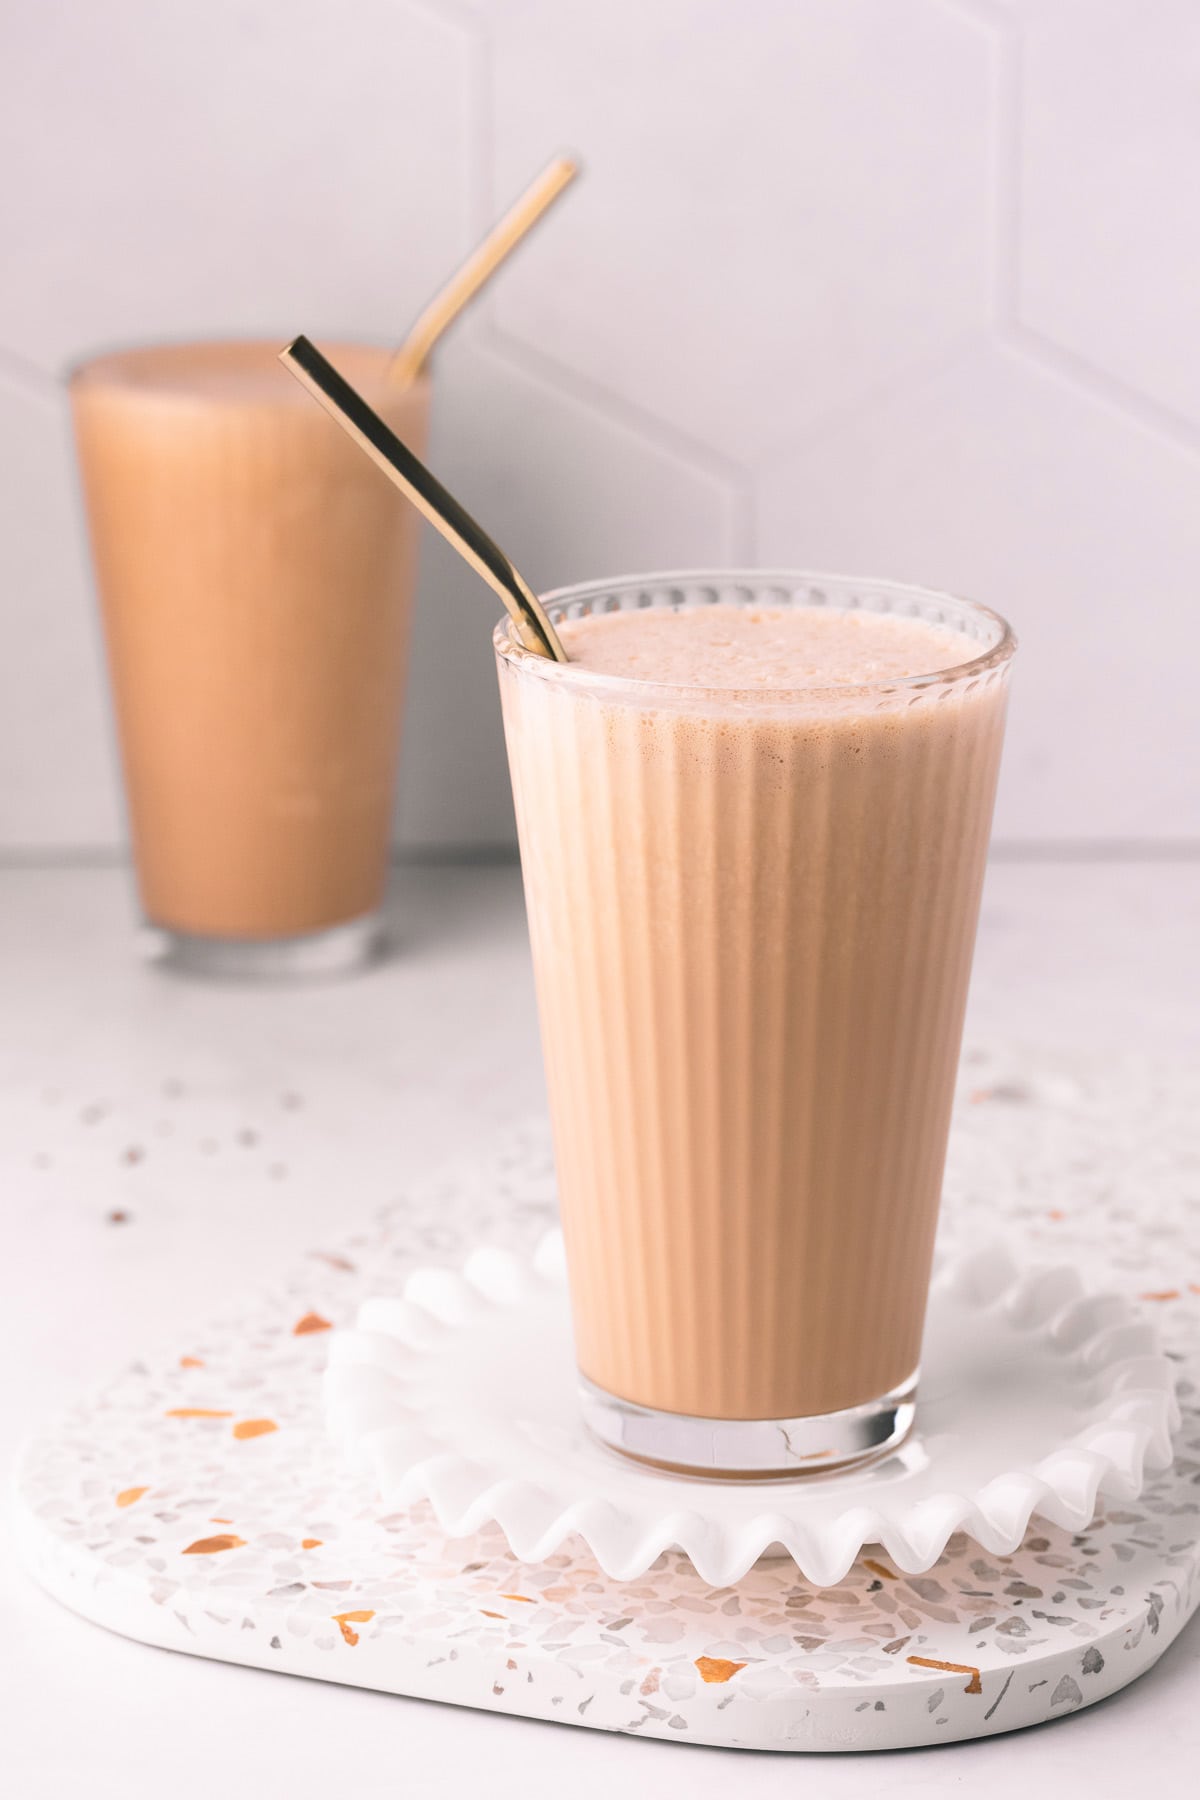 A freshly poured coffee milkshake, with a gold metal straw, on a grey tiled background.